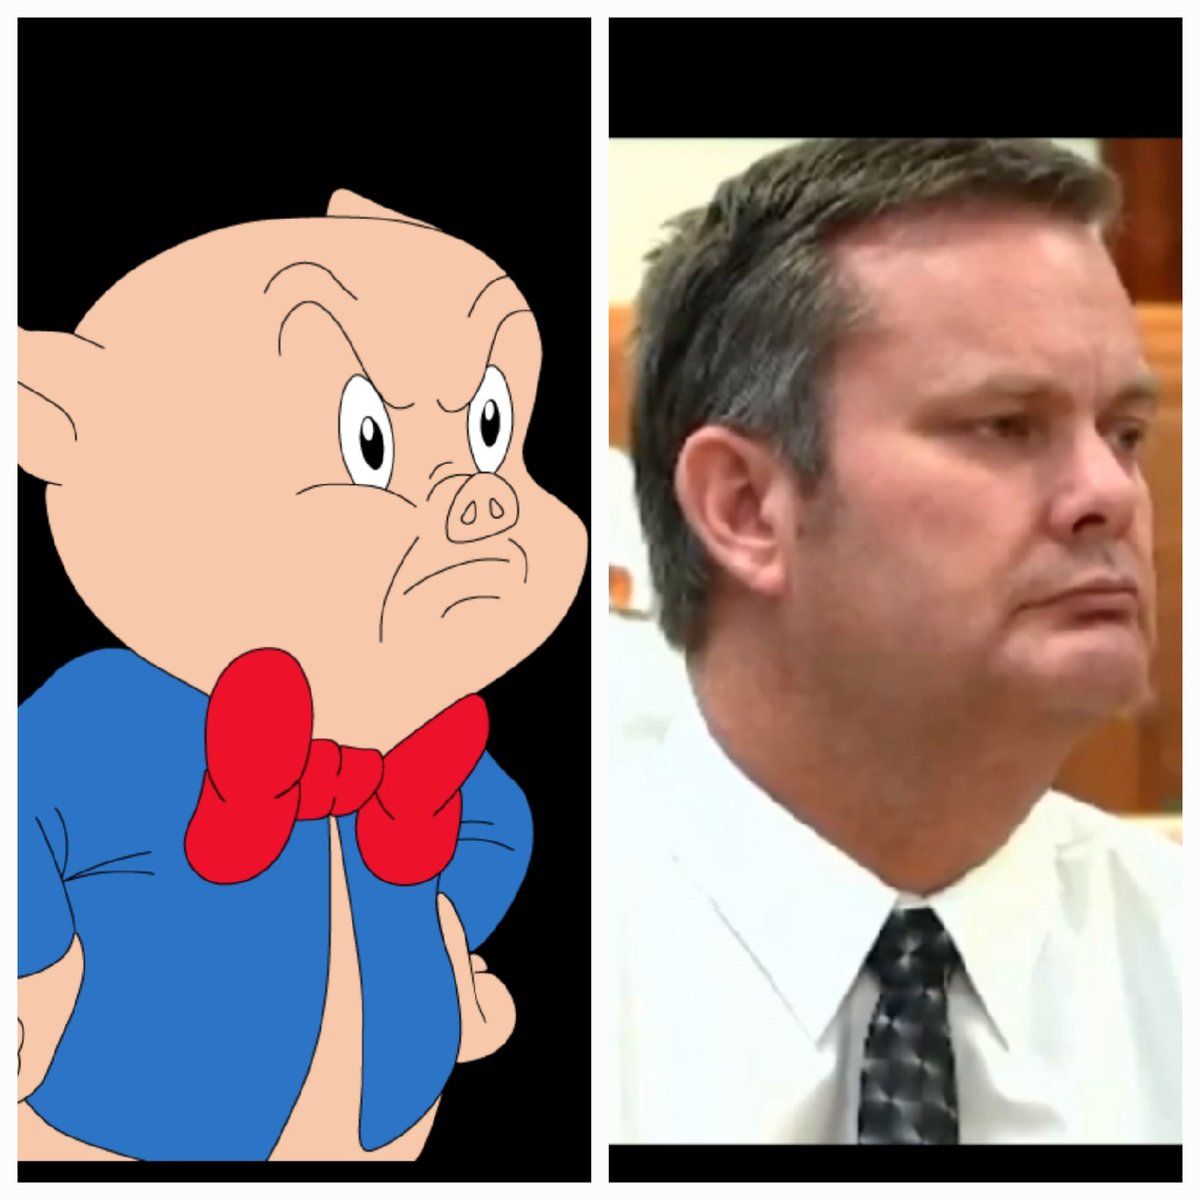 Is it just me or....??
#LoriVallowDaybellTrial
#chaddaybell
#courttv